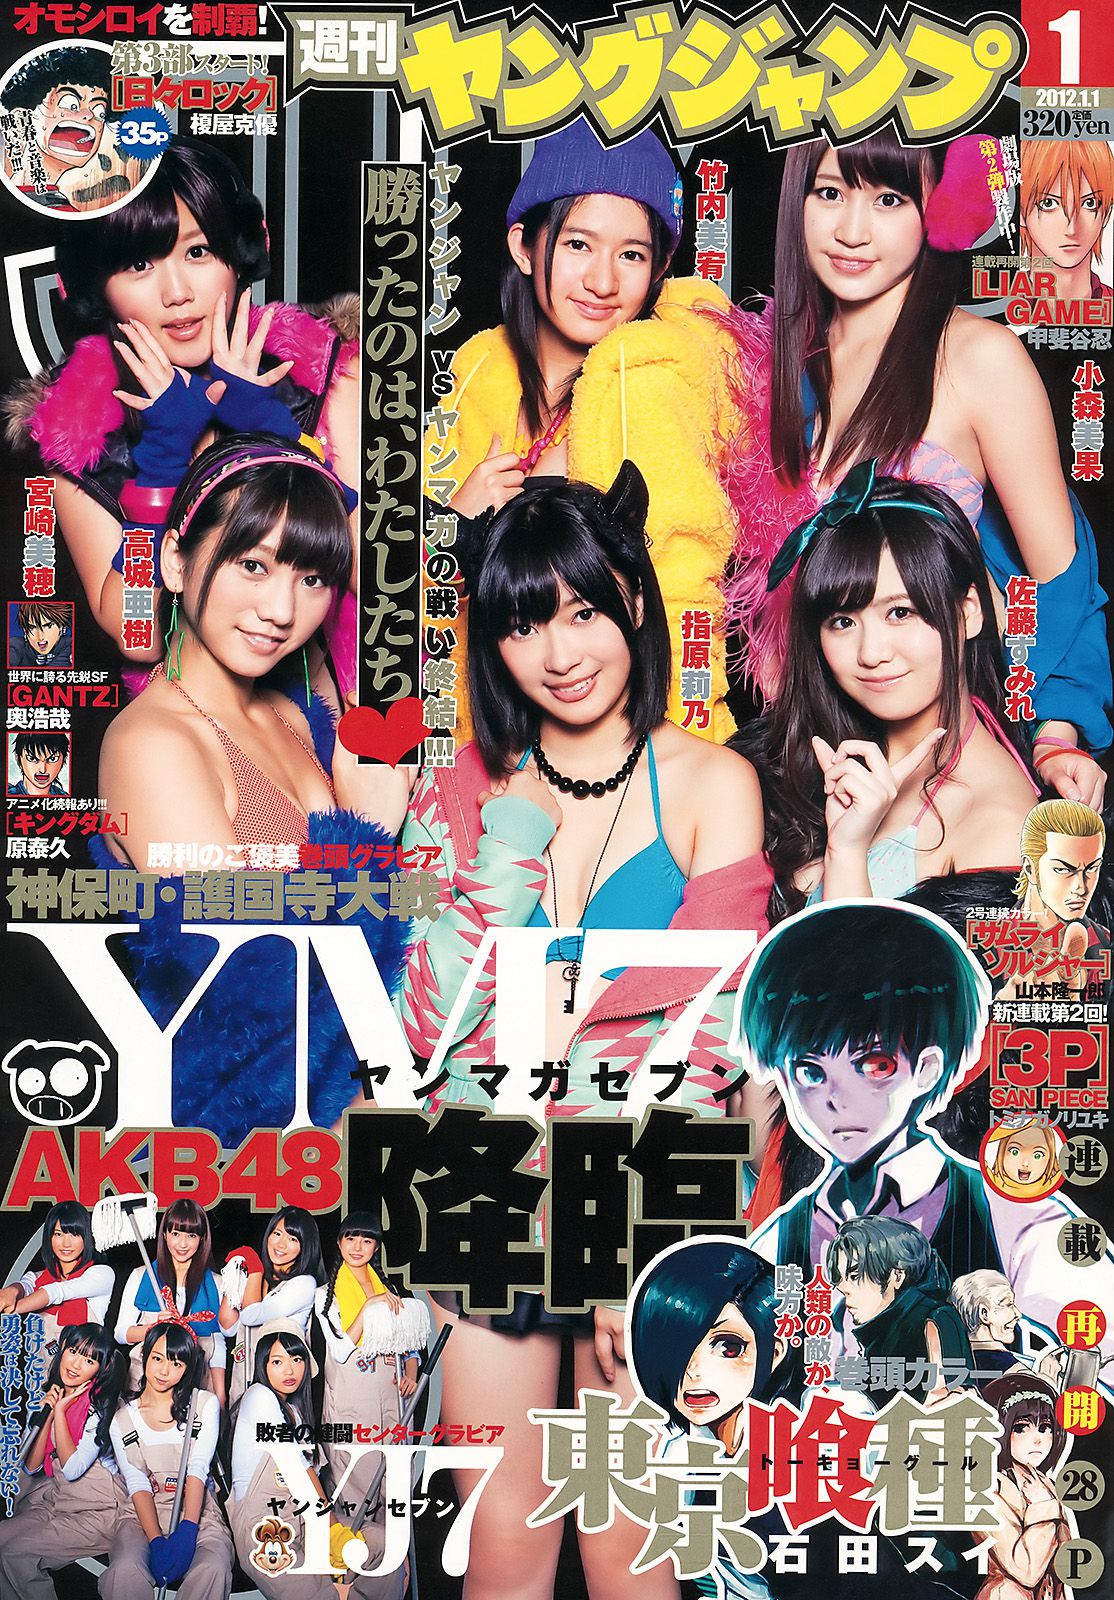 AKB48 YJ7 vs. YM7 神保町?護国寺大戦 FINAL PARTY [Weekly Young Jump] 2012年No.01 写真杂志1